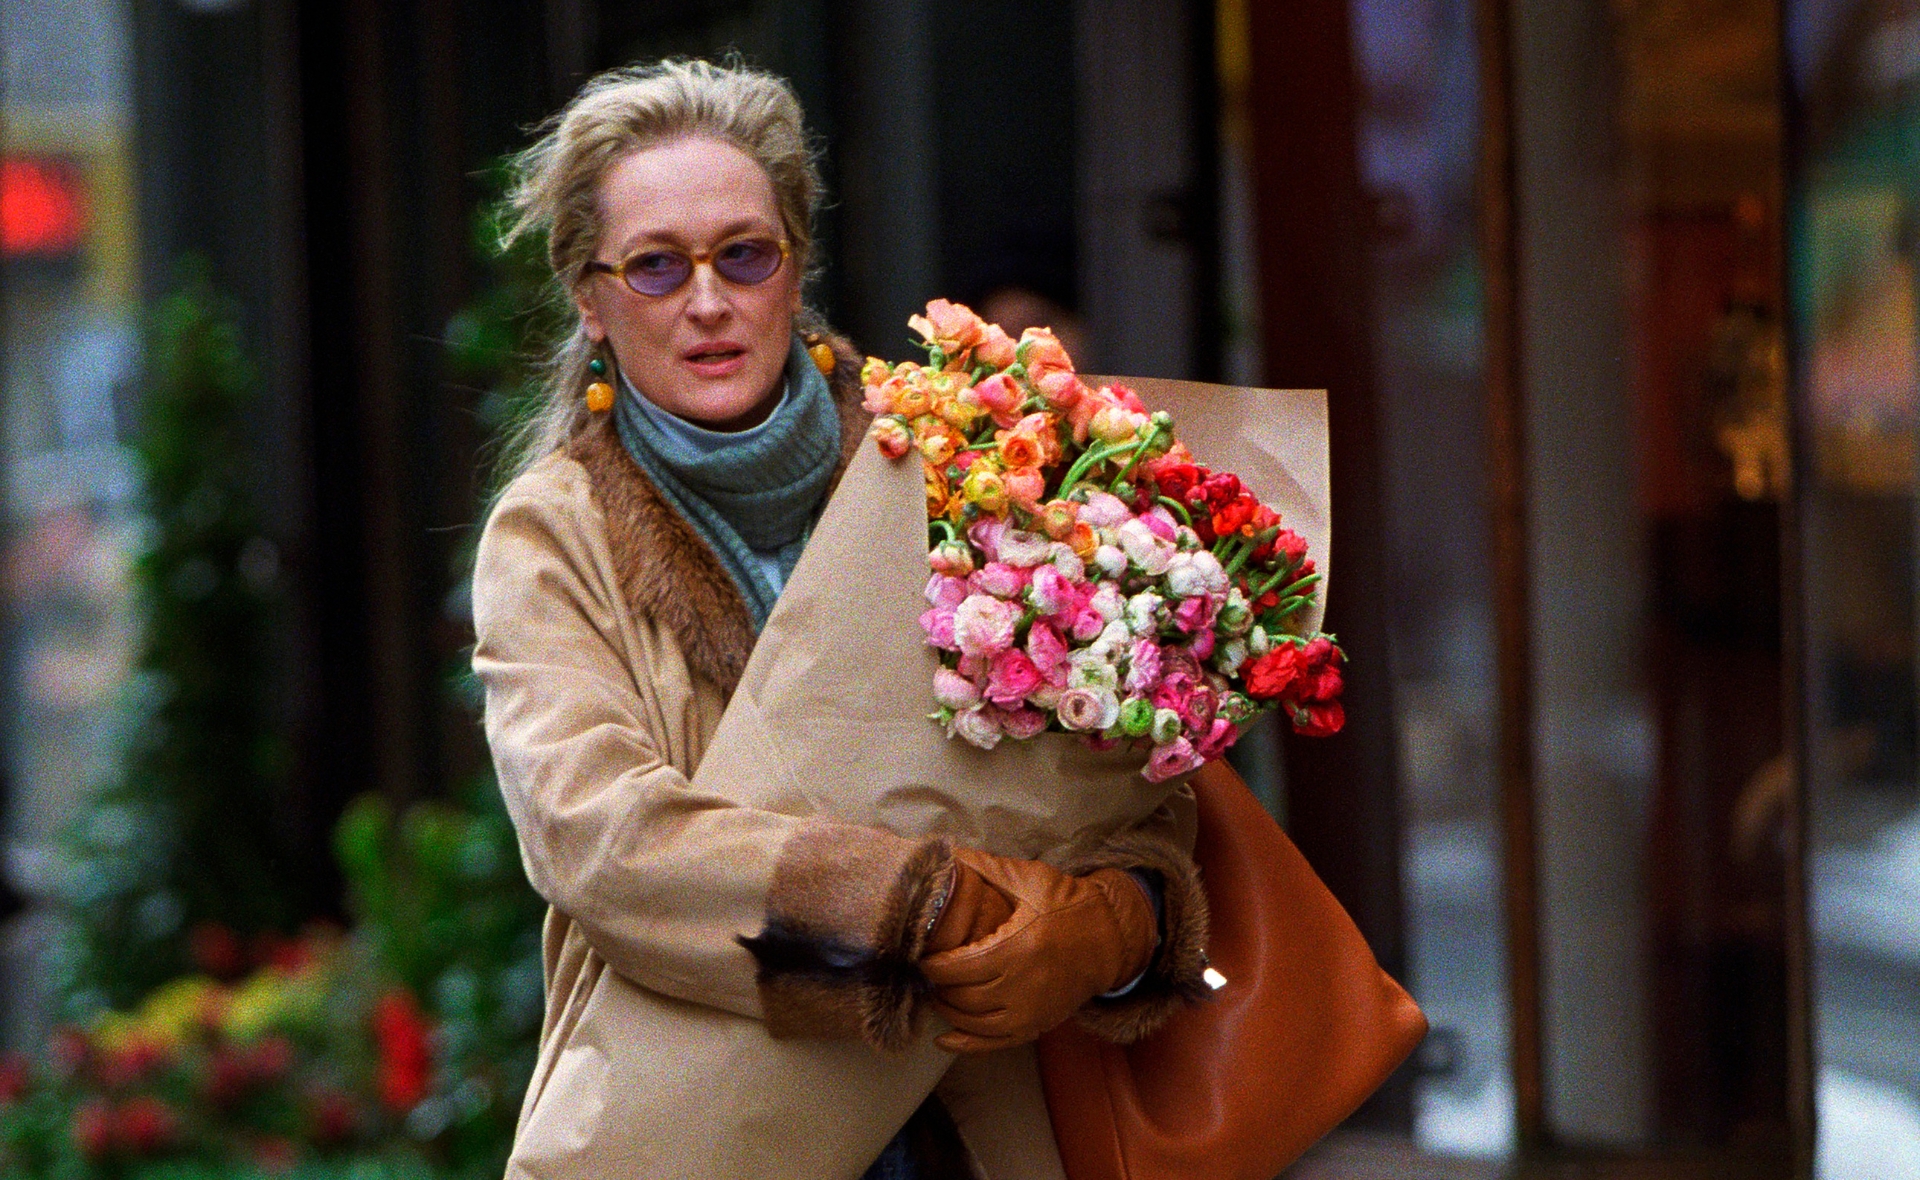 The best flower delivery services to help you say “I love you”, this Valentine’s Day